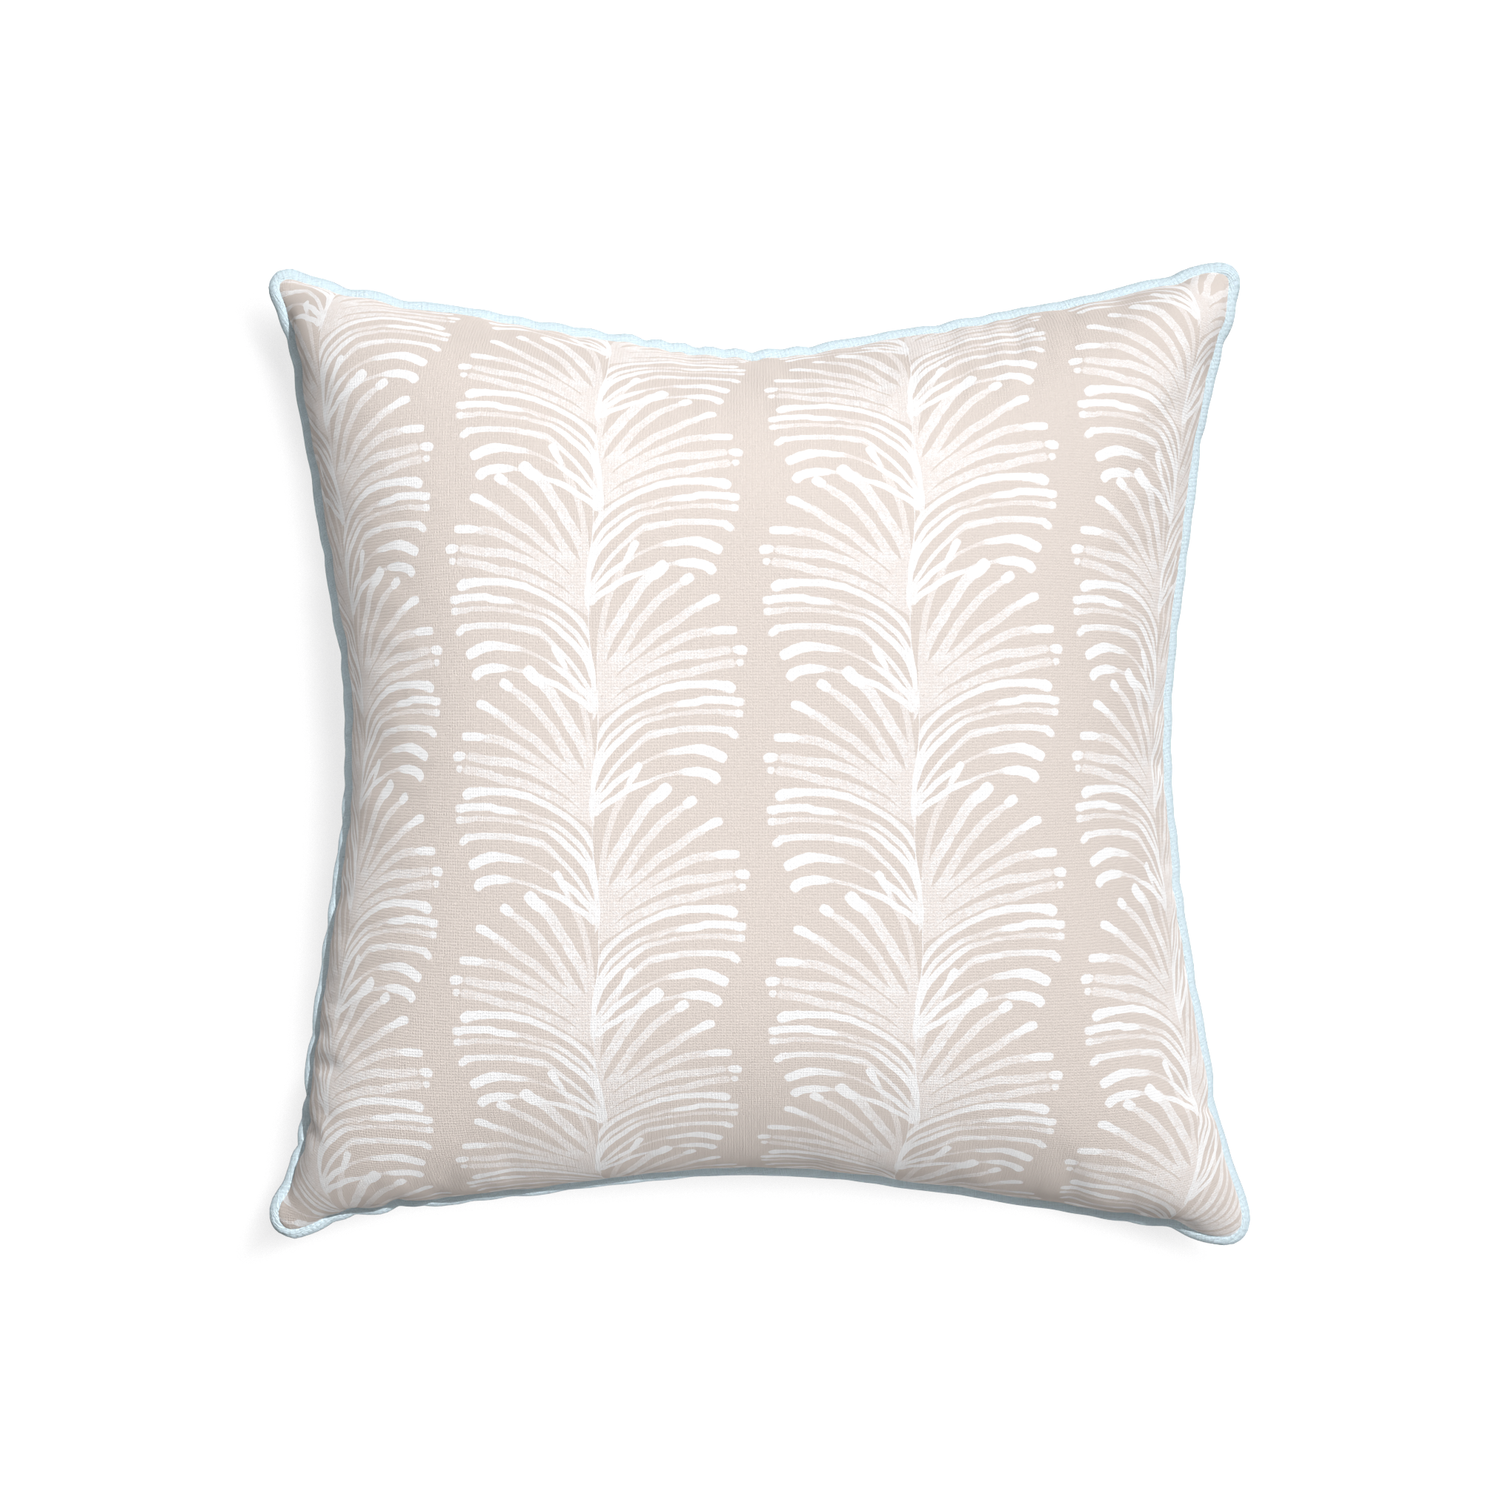 22-square emma sand custom sand colored botanical stripepillow with powder piping on white background